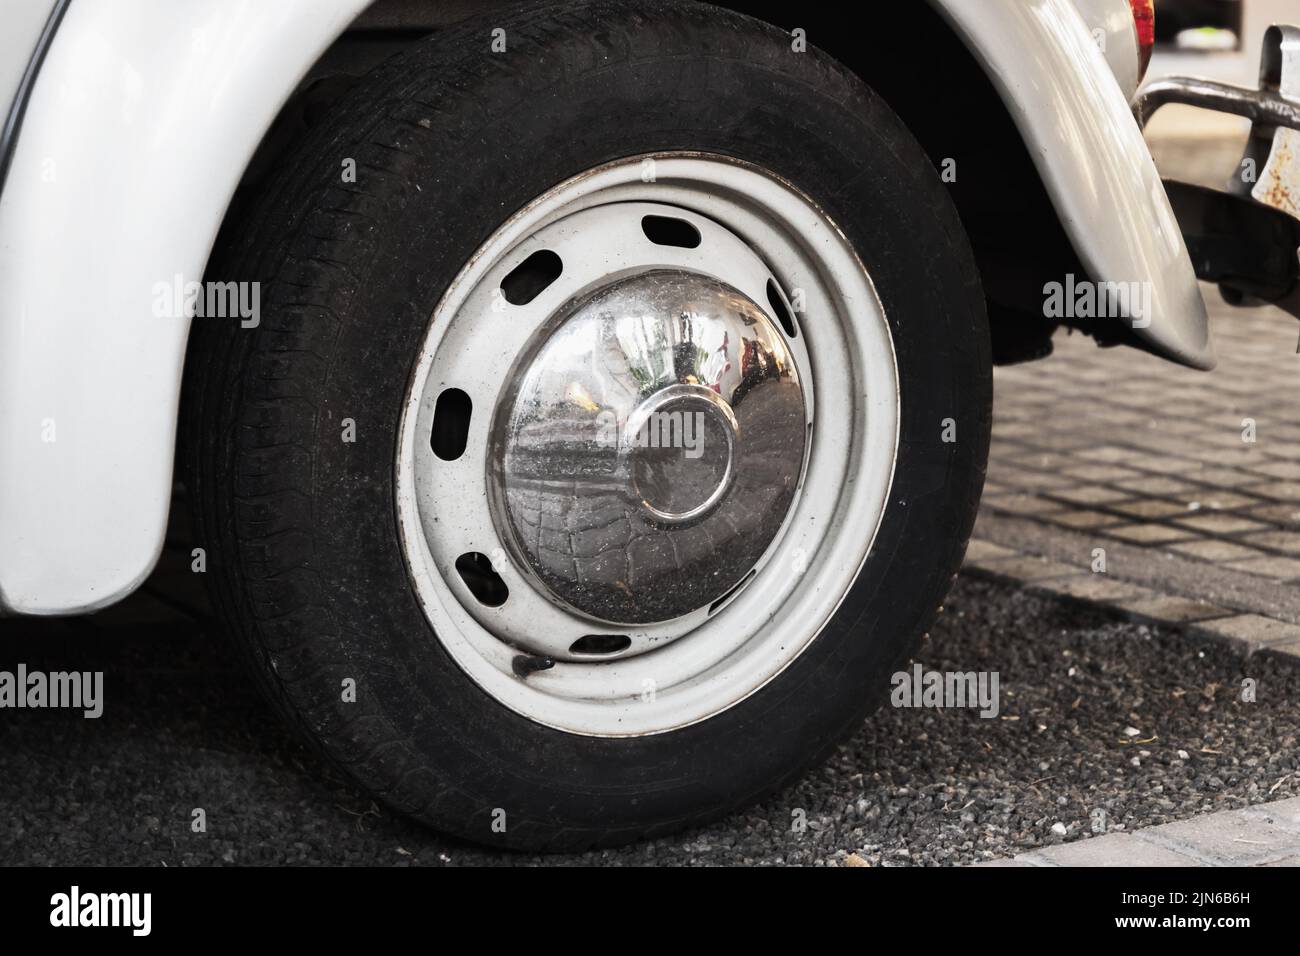 Vintage front car wheel with chromed cap, close up photo Stock Photo